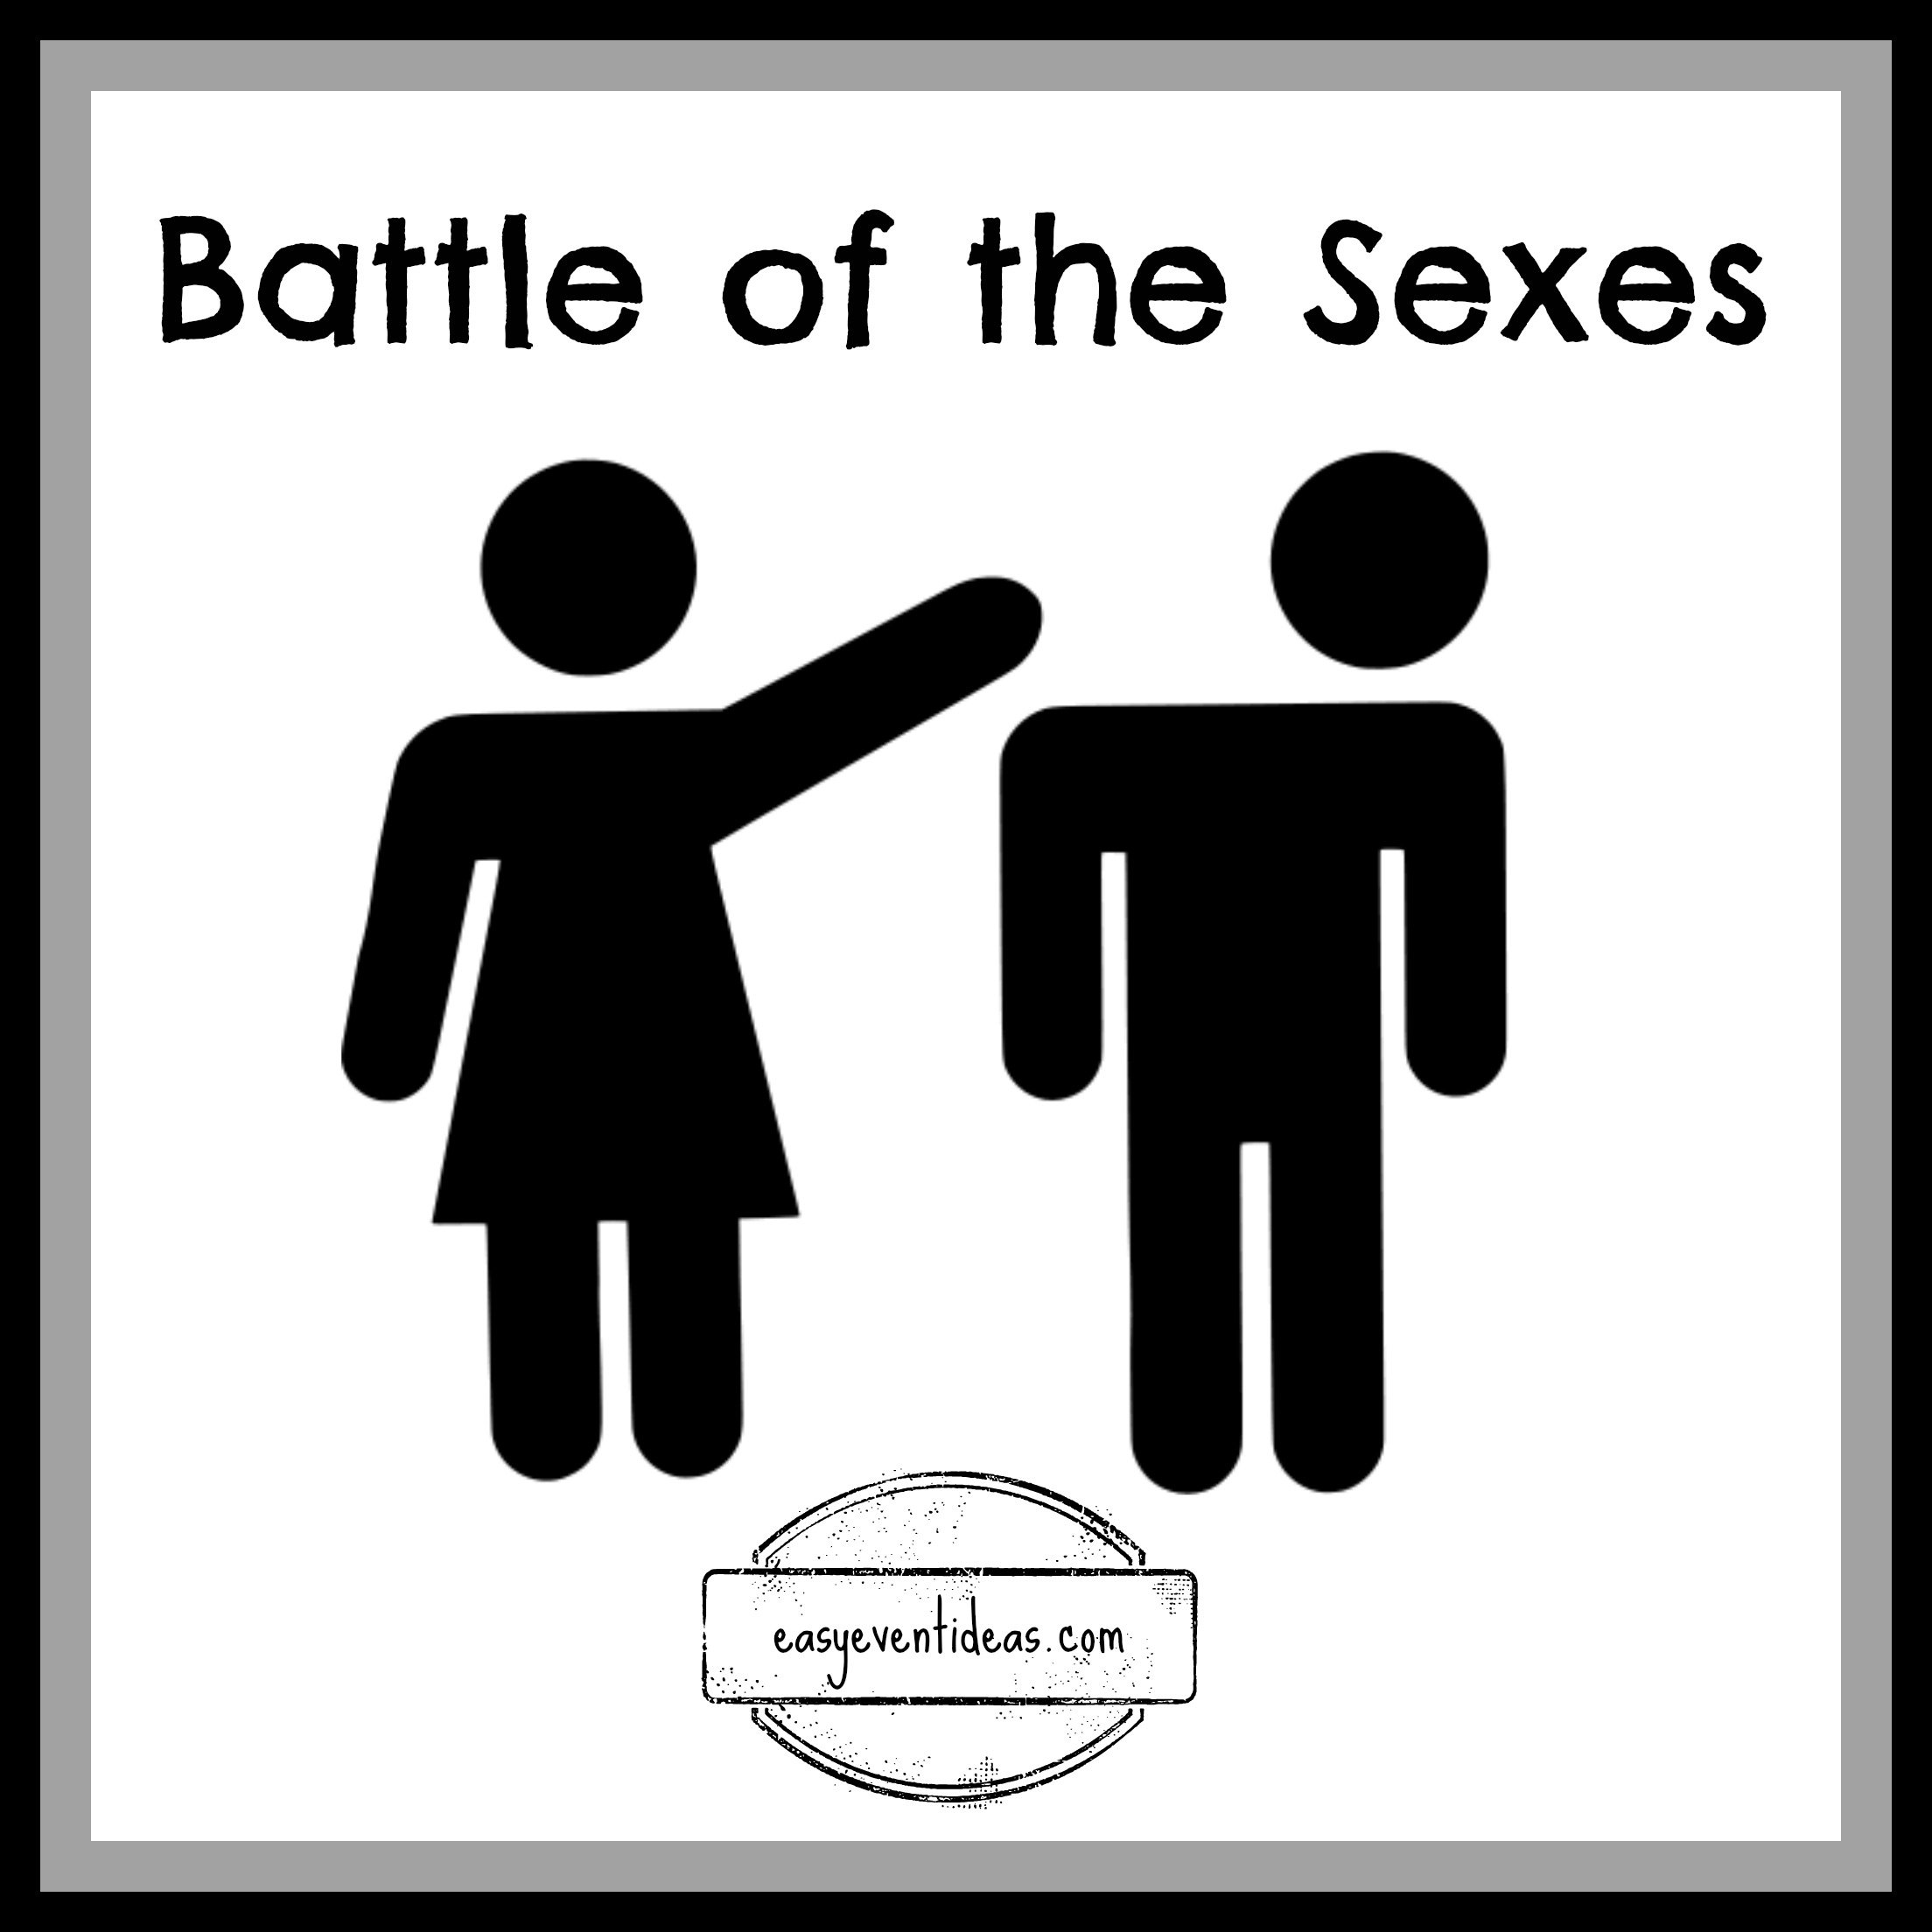 10 Lovable Battle Of The Sexes Game Ideas battle of the sexes game easy event ideas 2022